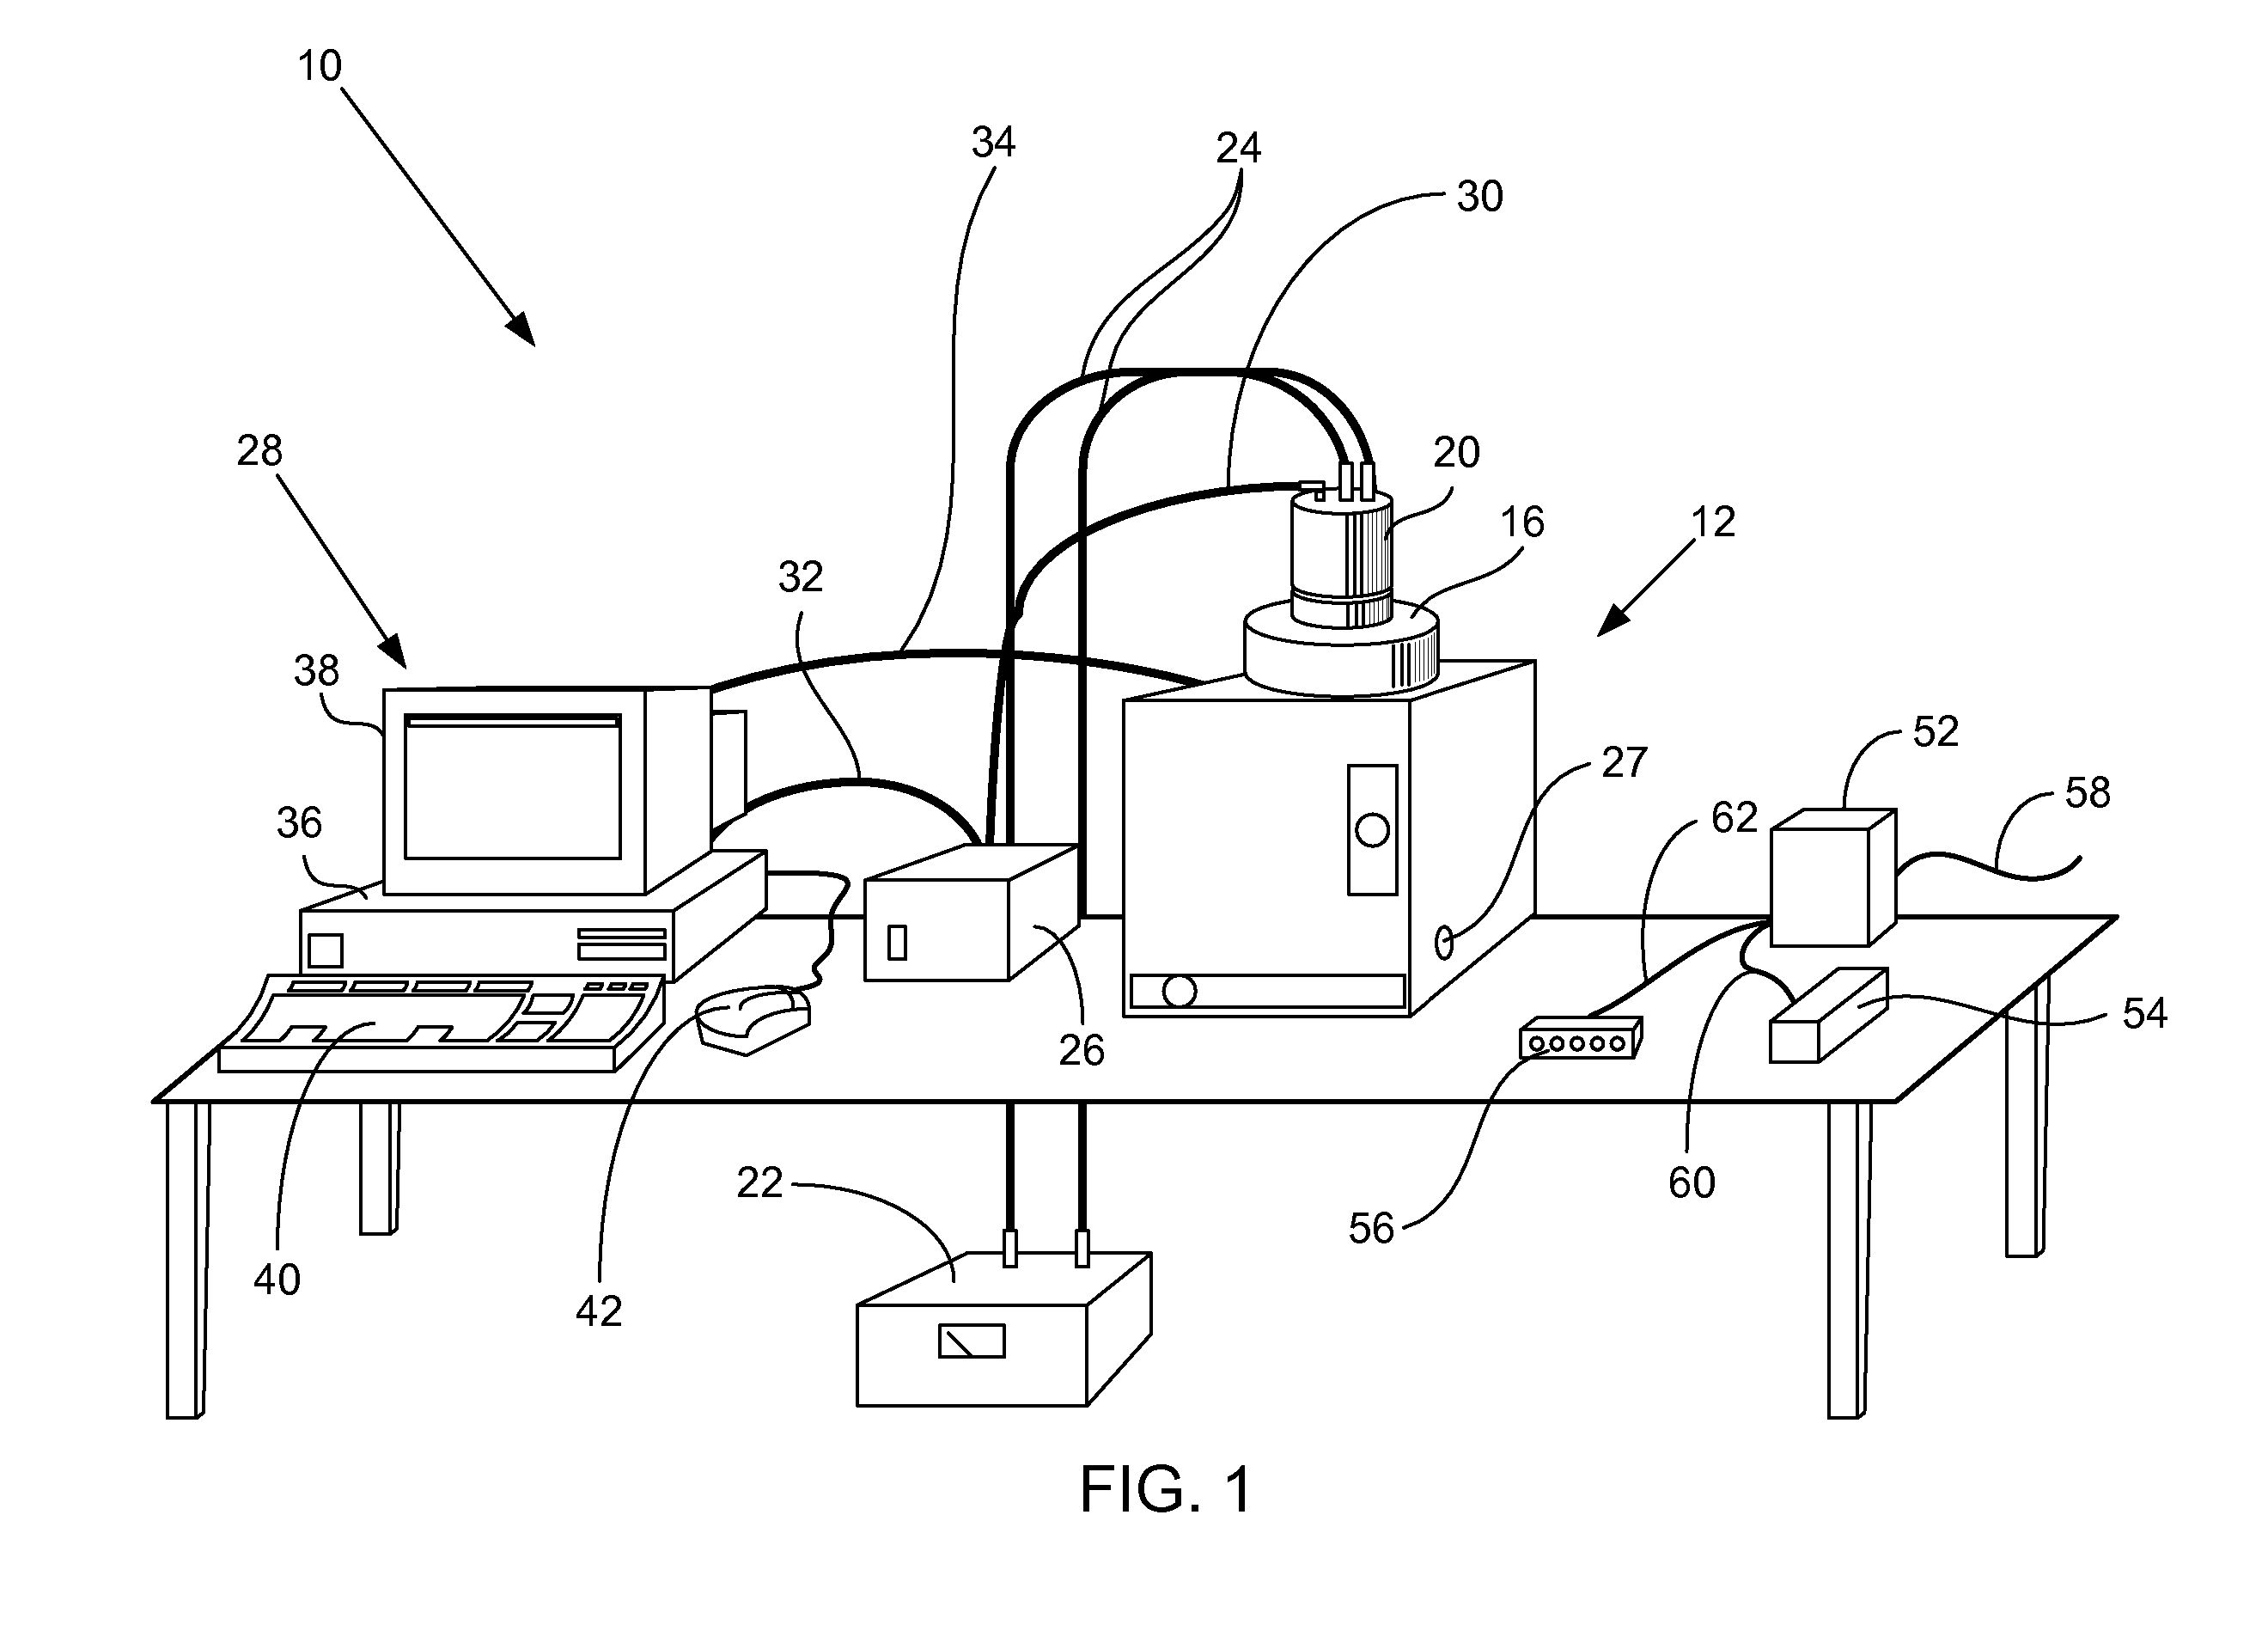 Imaging system with anesthesia system